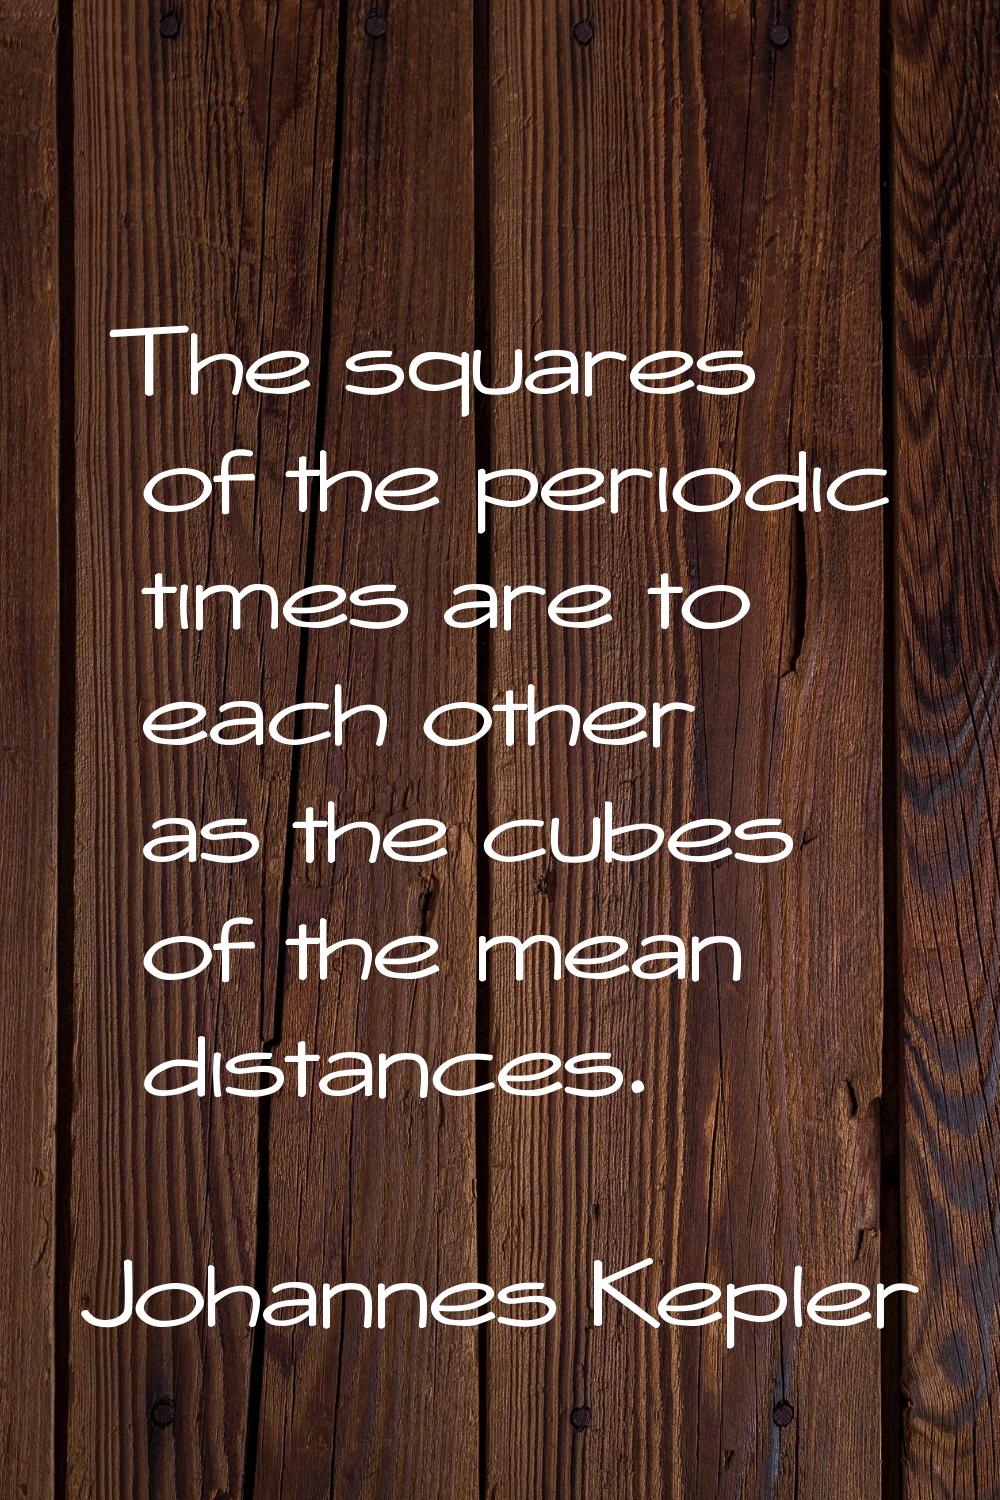 The squares of the periodic times are to each other as the cubes of the mean distances.